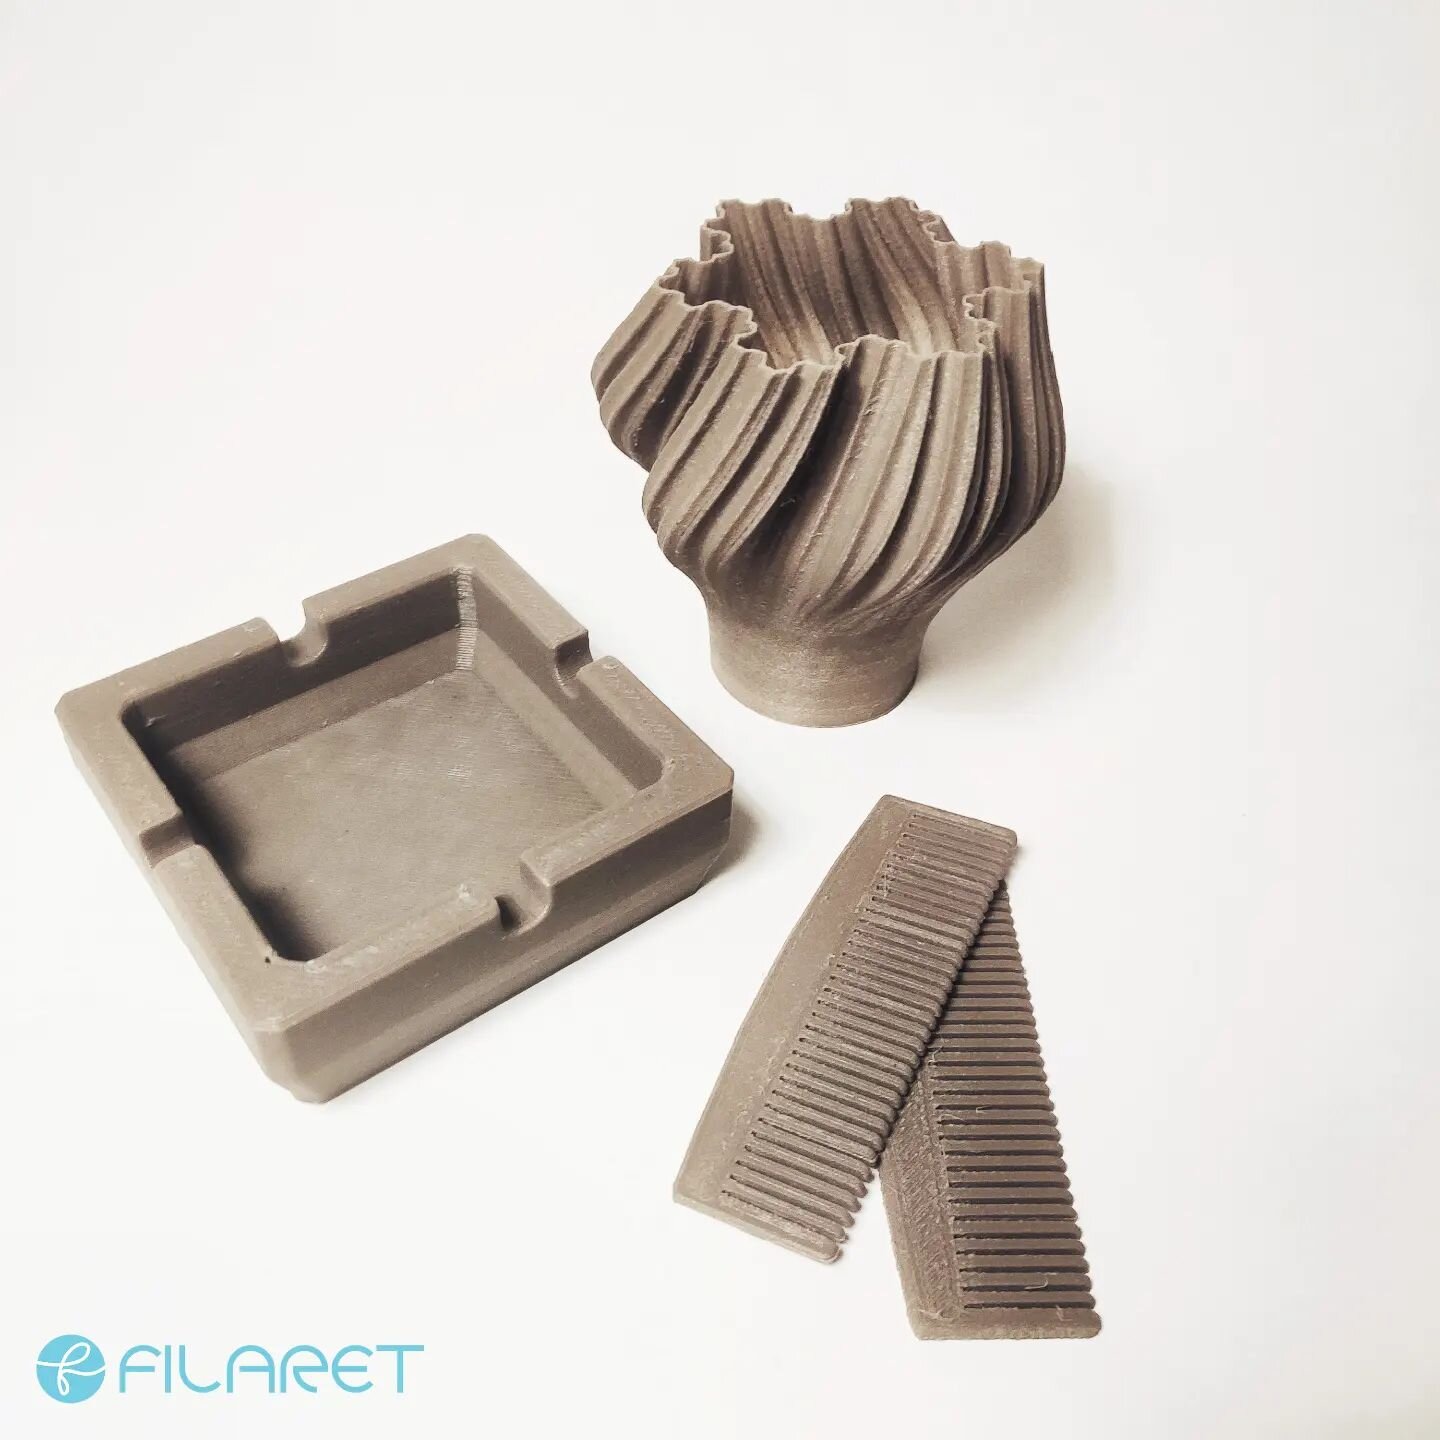 Have you ever combed your hair with cigarette butts? 💁&zwj;♀️

Ashtray, artistic cup and combs 3D printed with Filaret's upcycled cigarette butt filament! ♻️

Thank you @lecktor3d and @respiray_global team for your printing services. 💚

#3dprinting